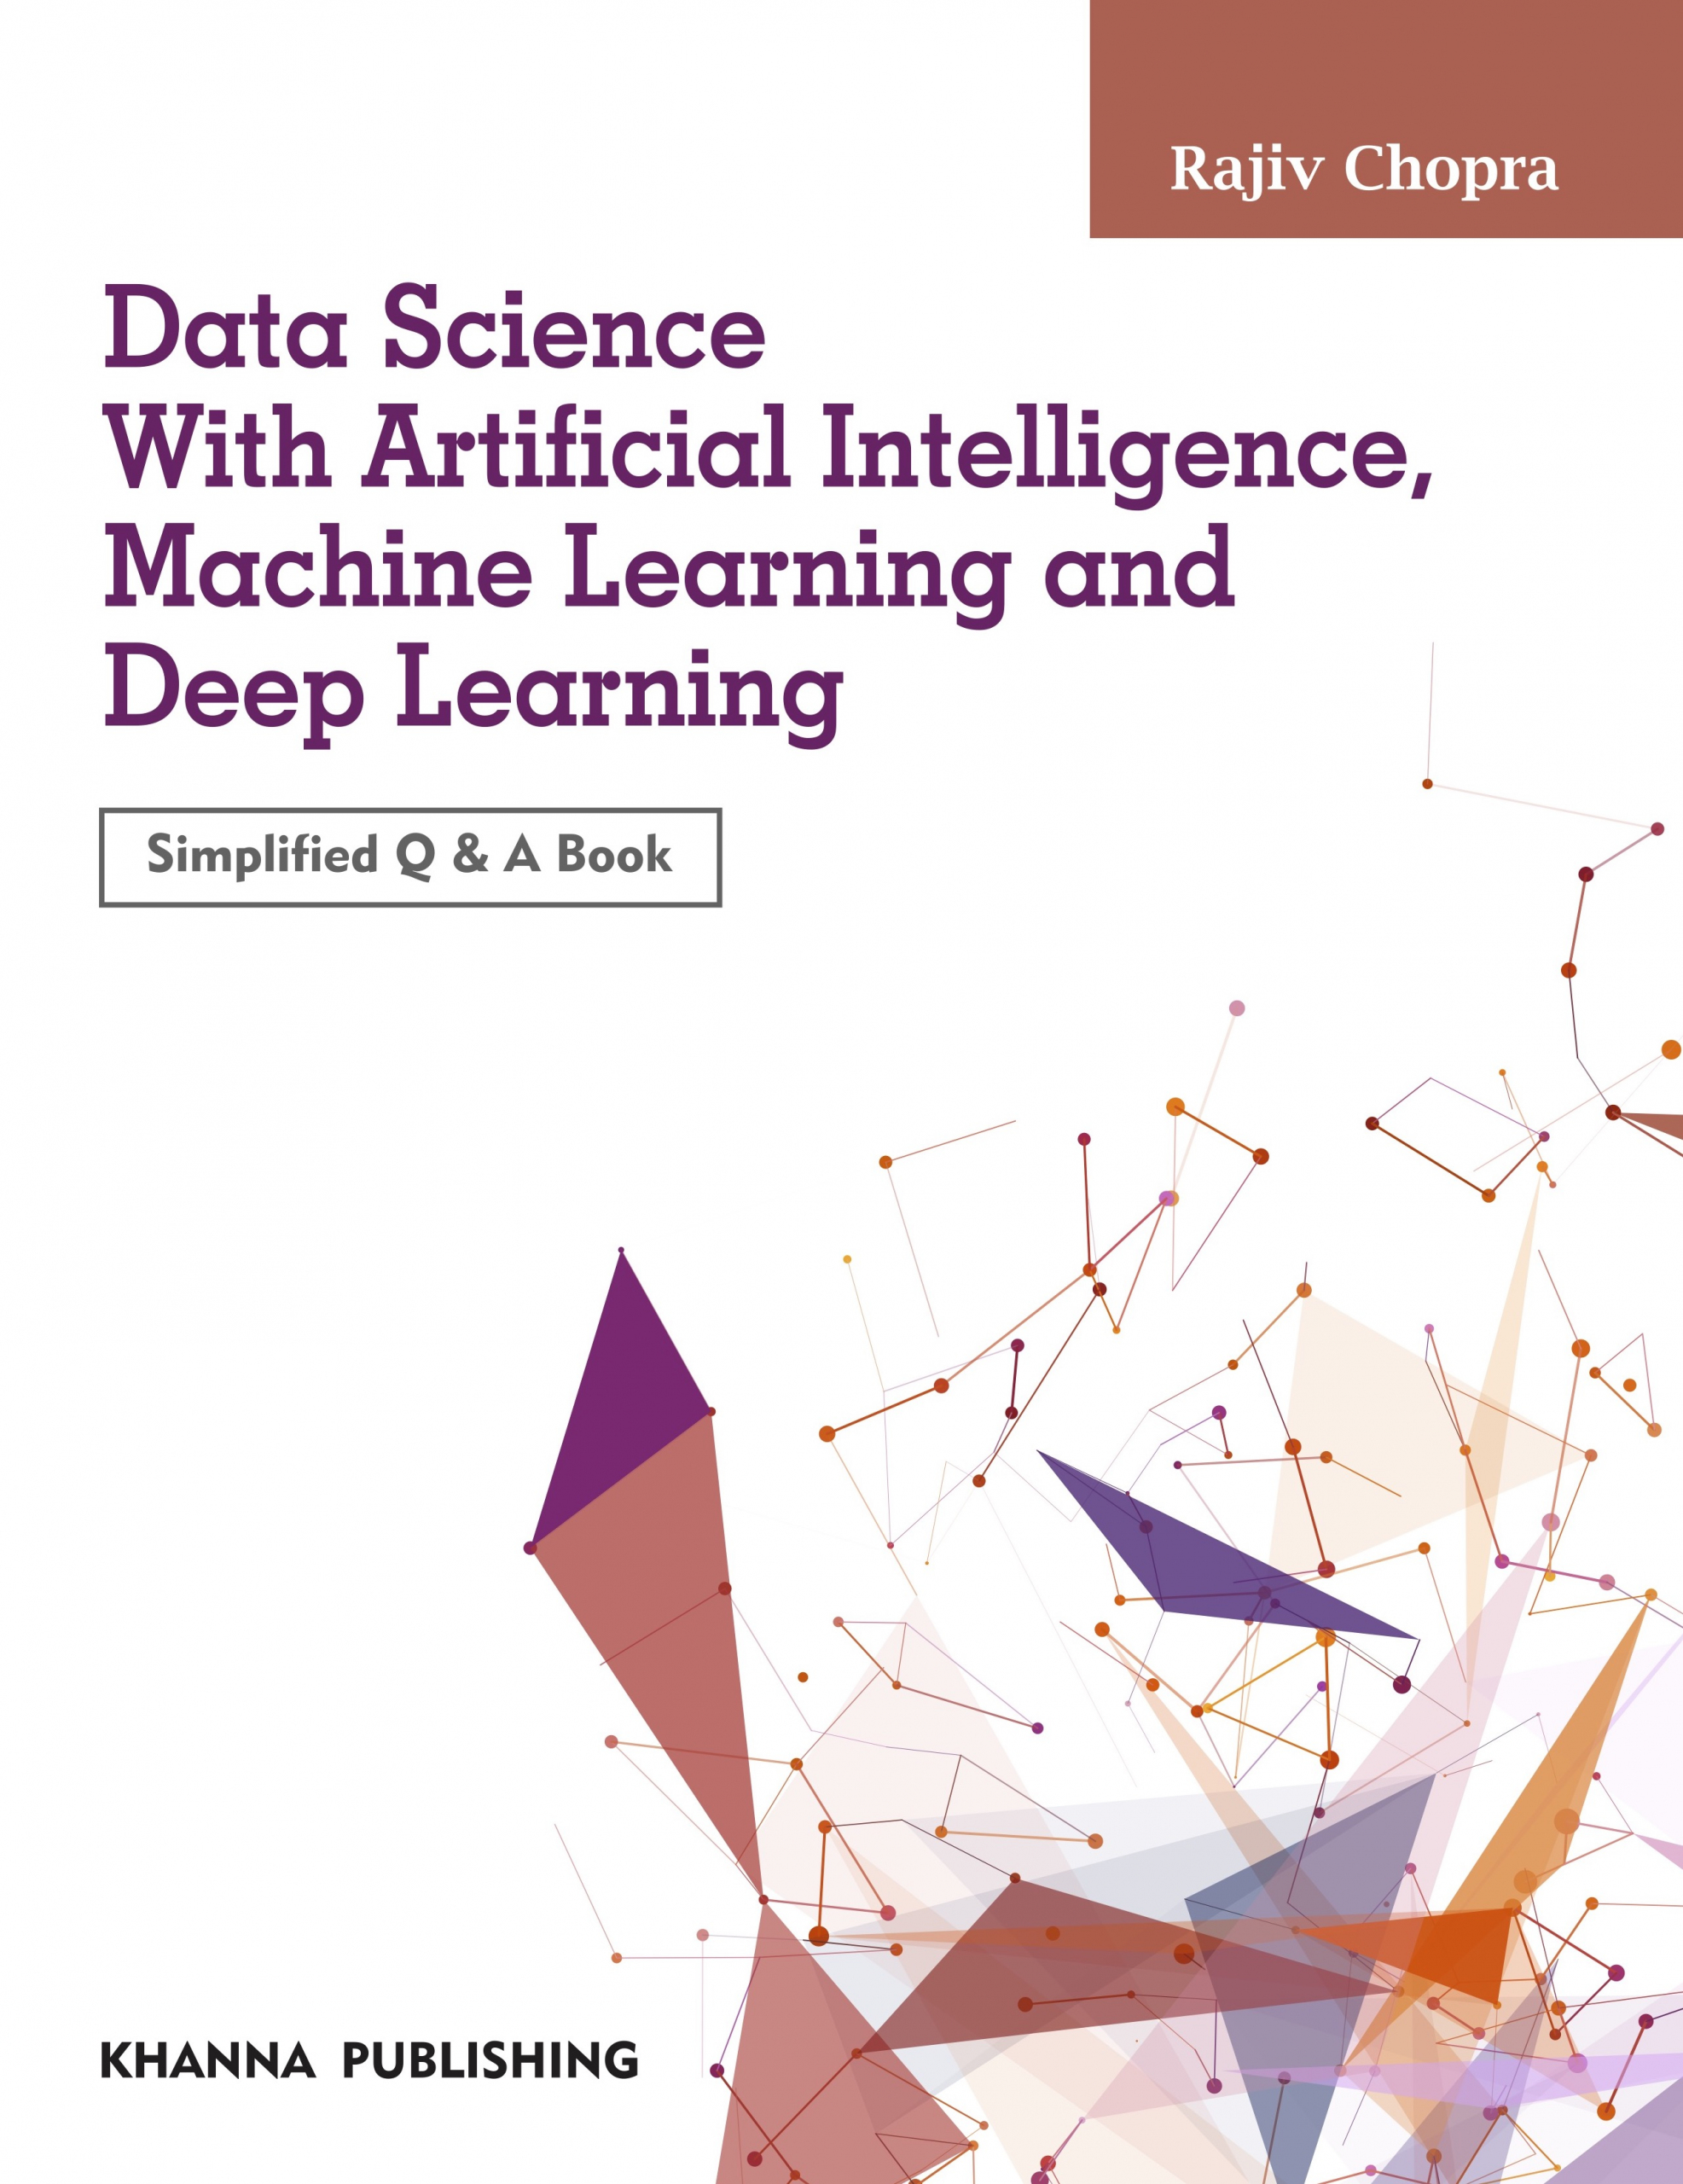 Data Science with Artificial Intelligence, Machine Learning and Deep Learning